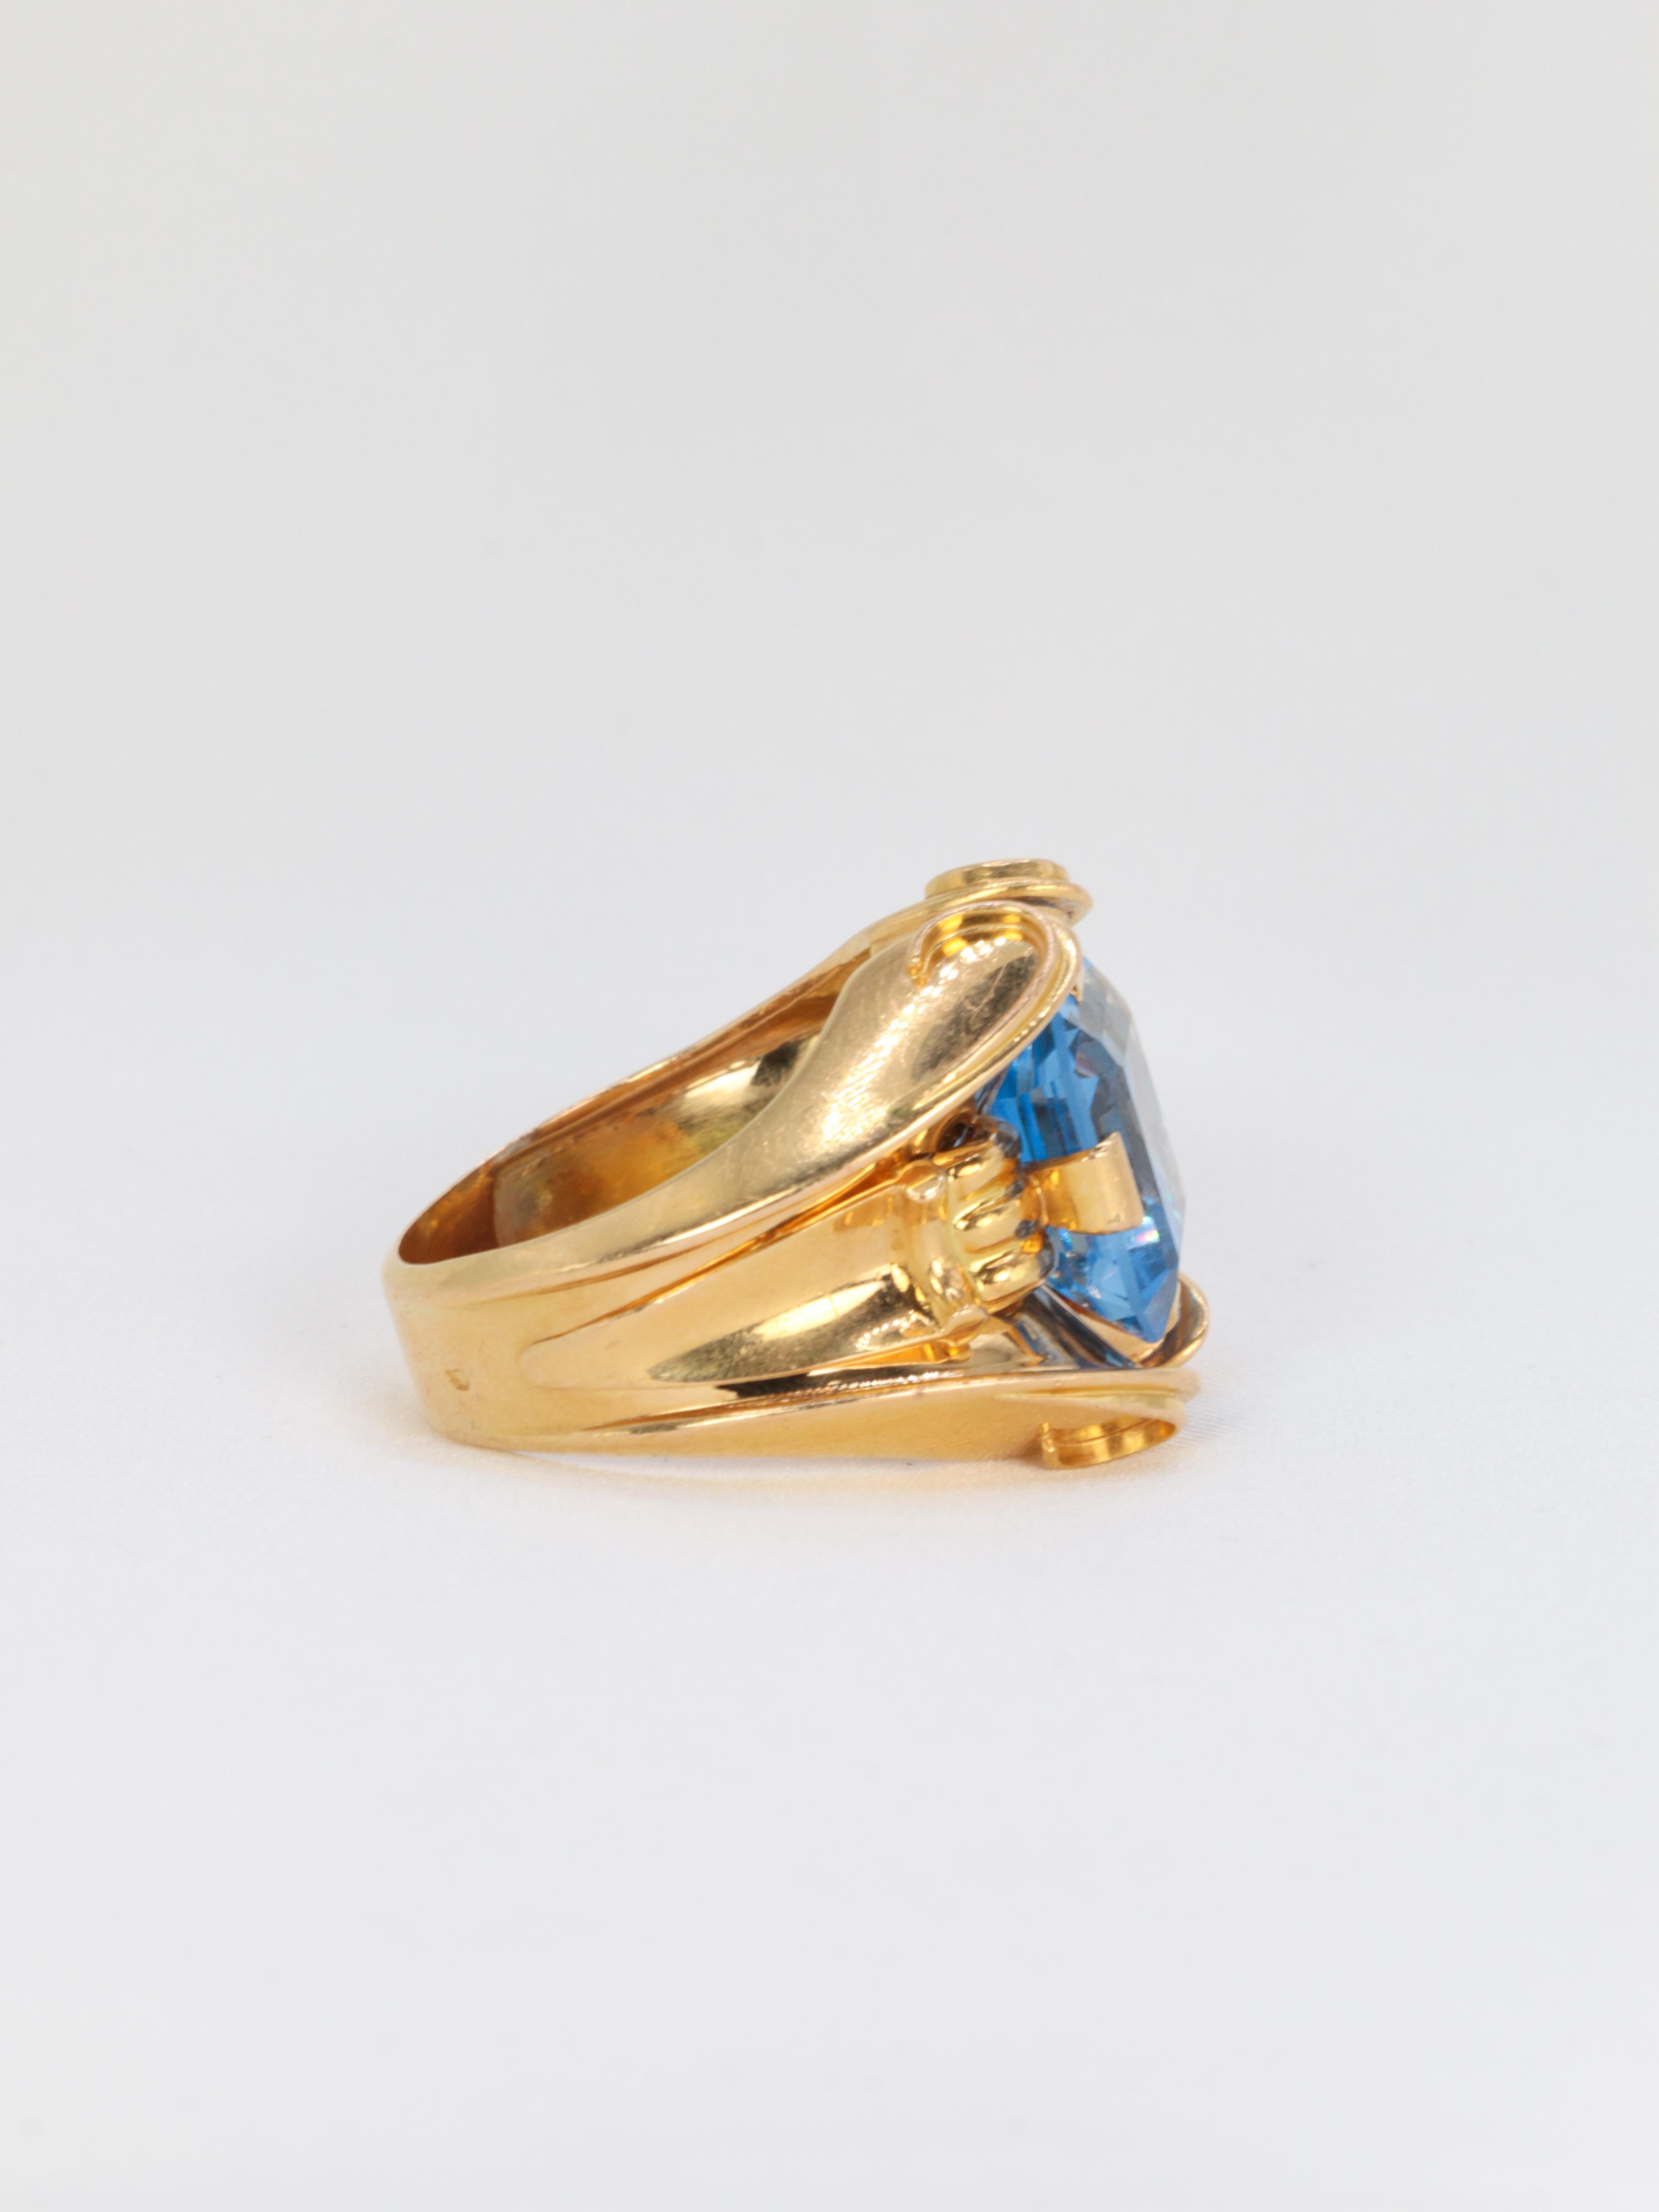 Retro Gold Vintage Cocktail Ring Set with a Blue Stone